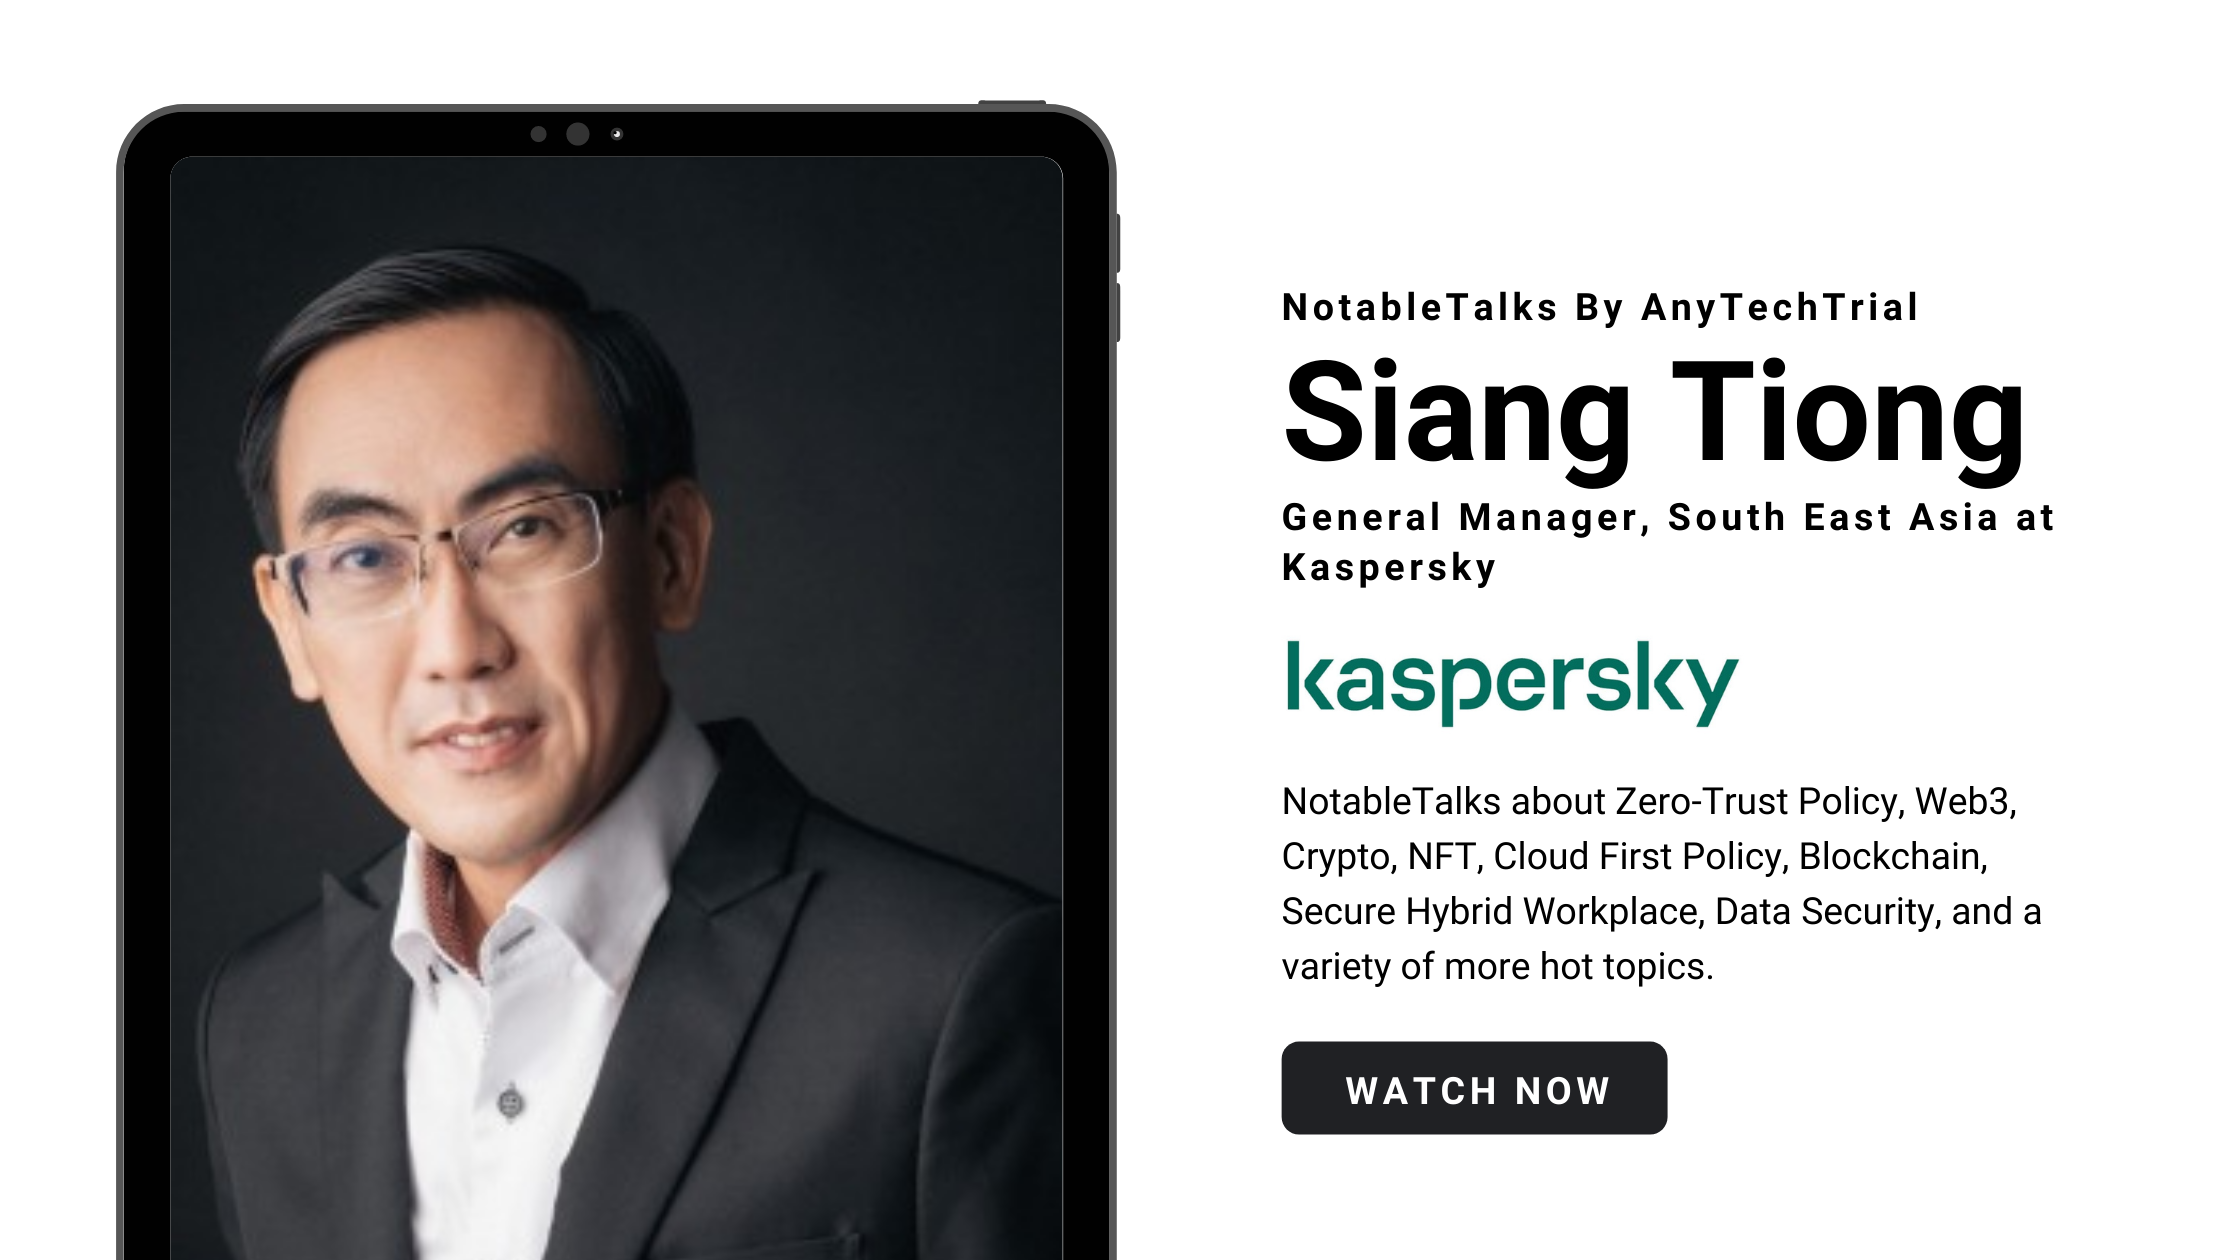 NotableTalks with Siang Tiong Yeo, General Manager, South East Asia at Kaspersky